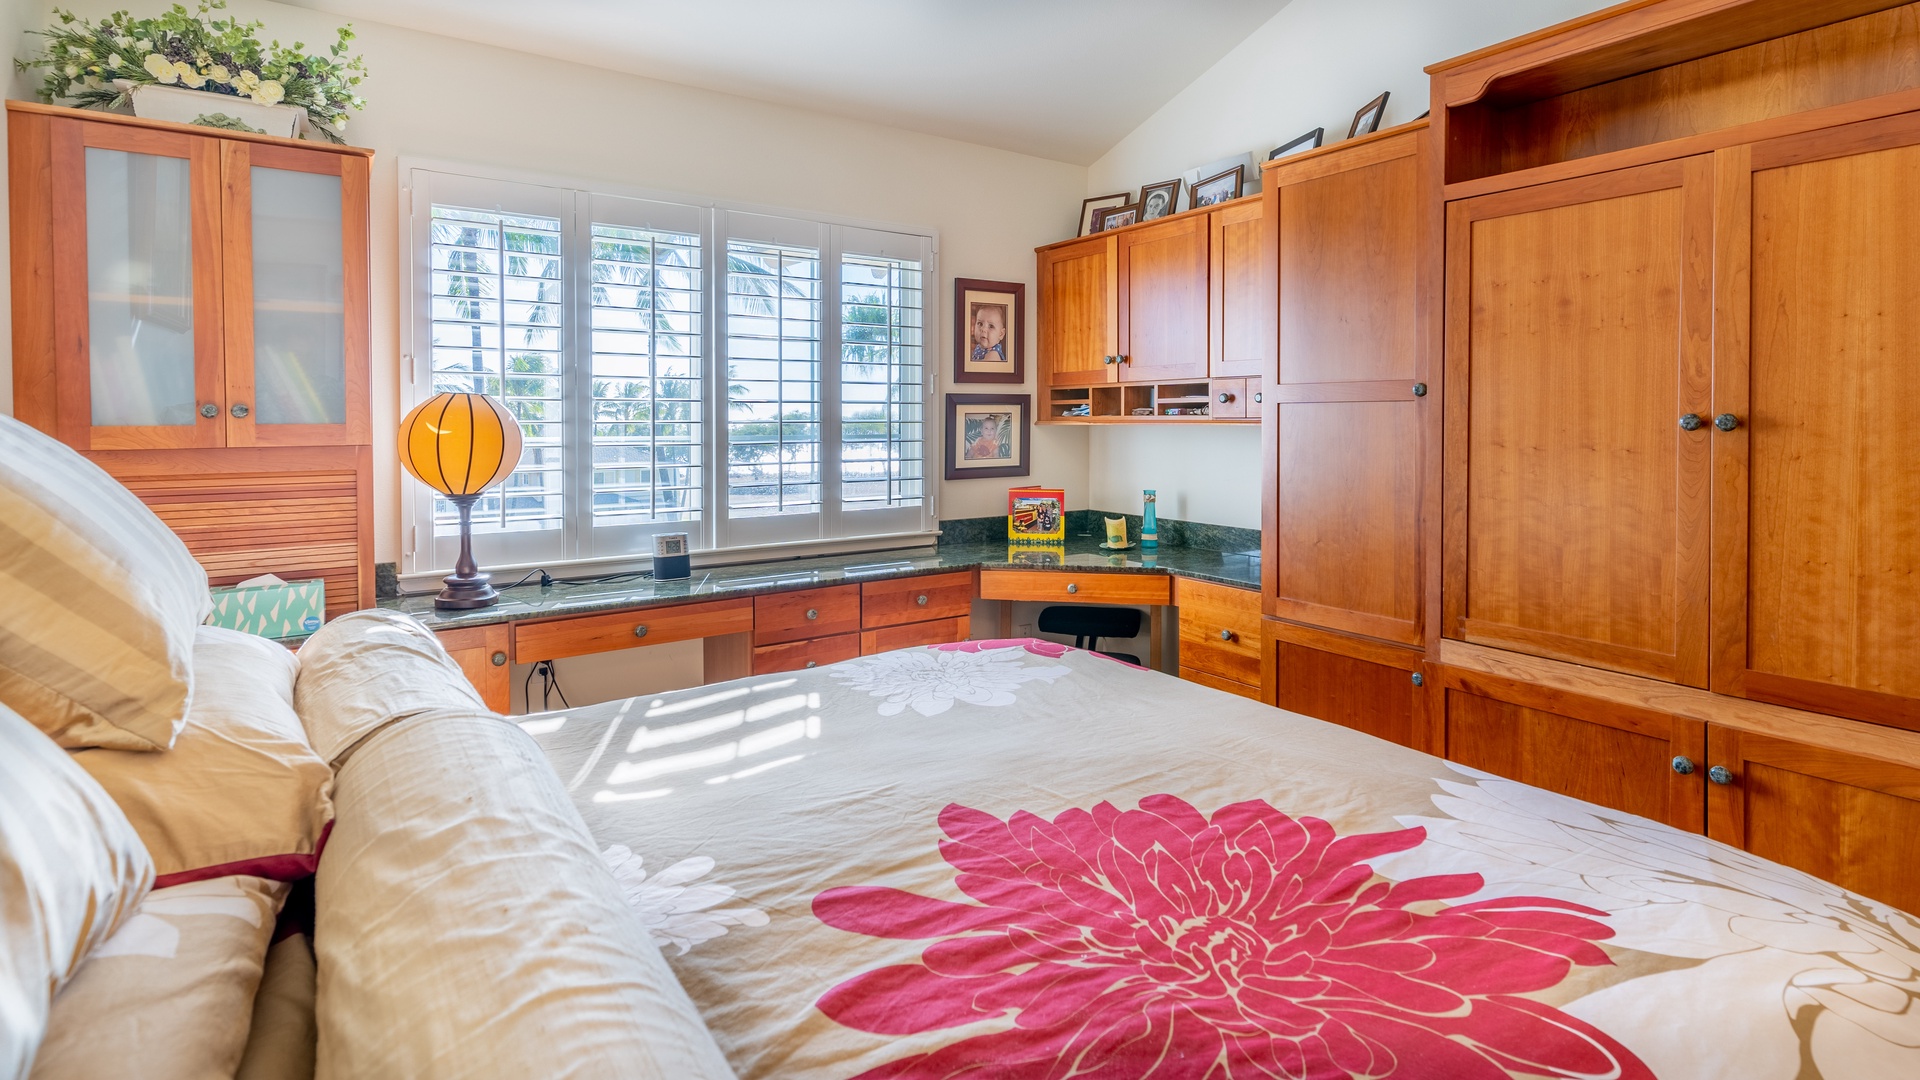 Kapolei Vacation Rentals, Kai Lani 16C - The primary guest bedroom includes a dresser and desk area.